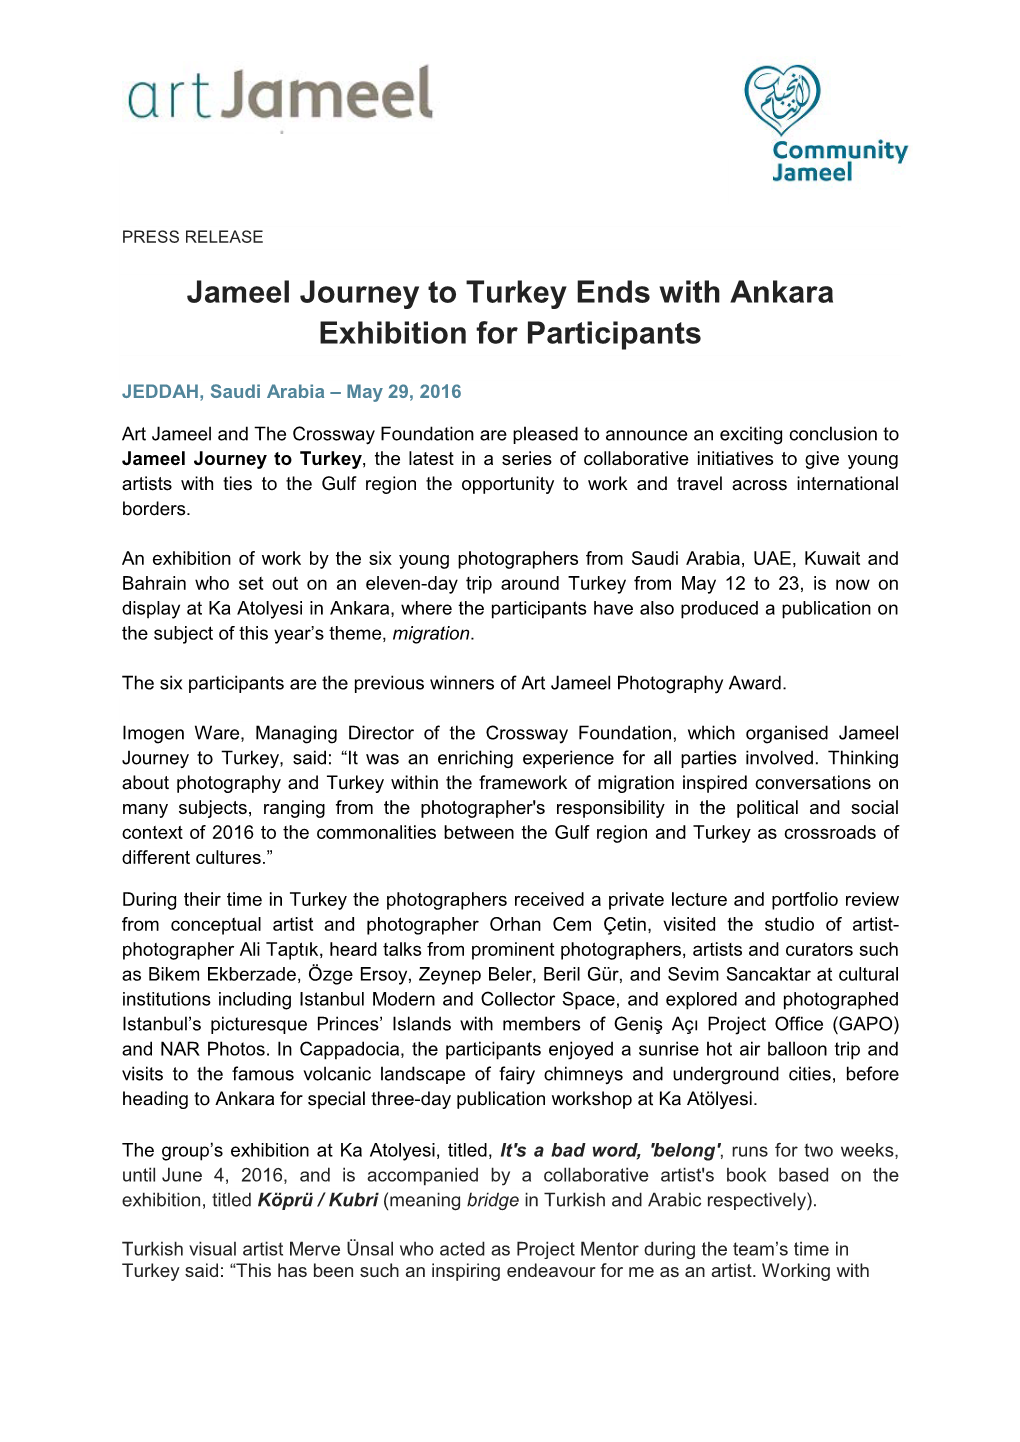 Jameel Journey to Turkey Ends with Ankara Exhibition for Participants